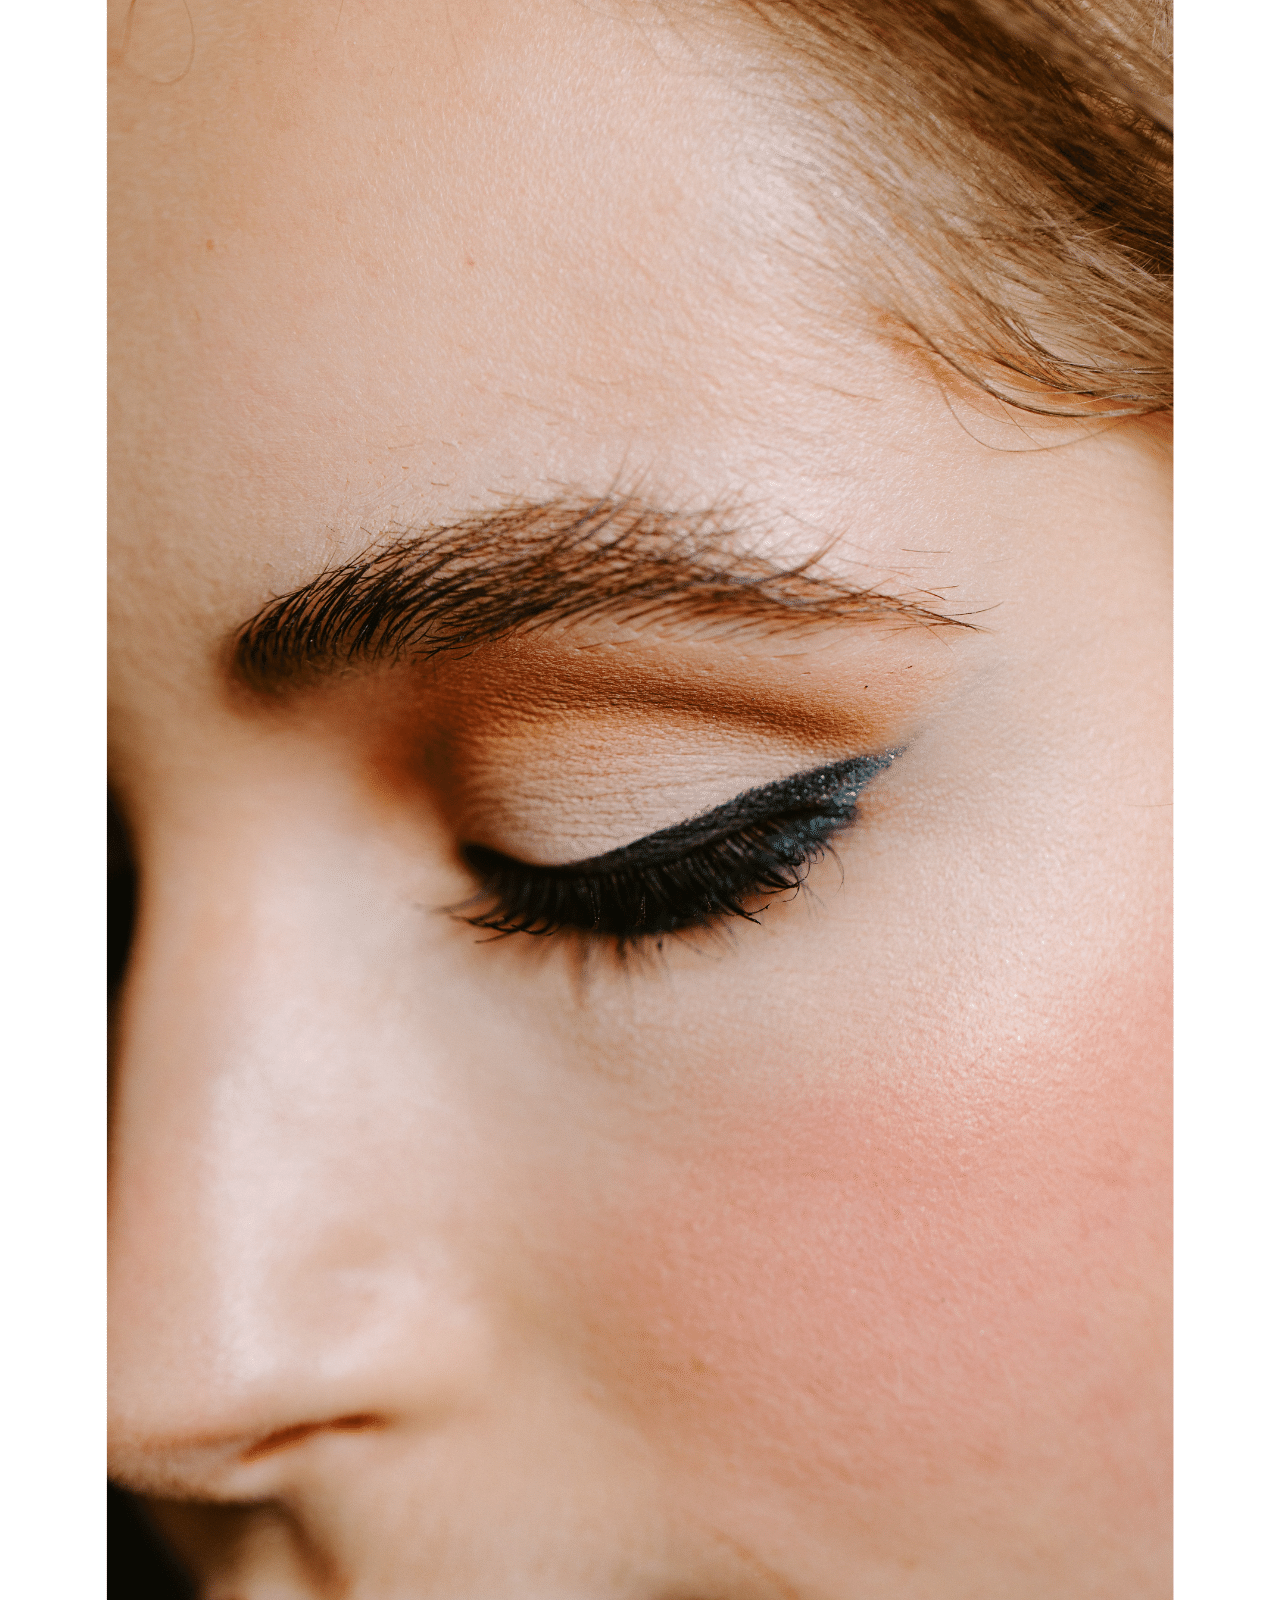 The 11 Best Eyeshadow Singles for an Eye-Catching Finish